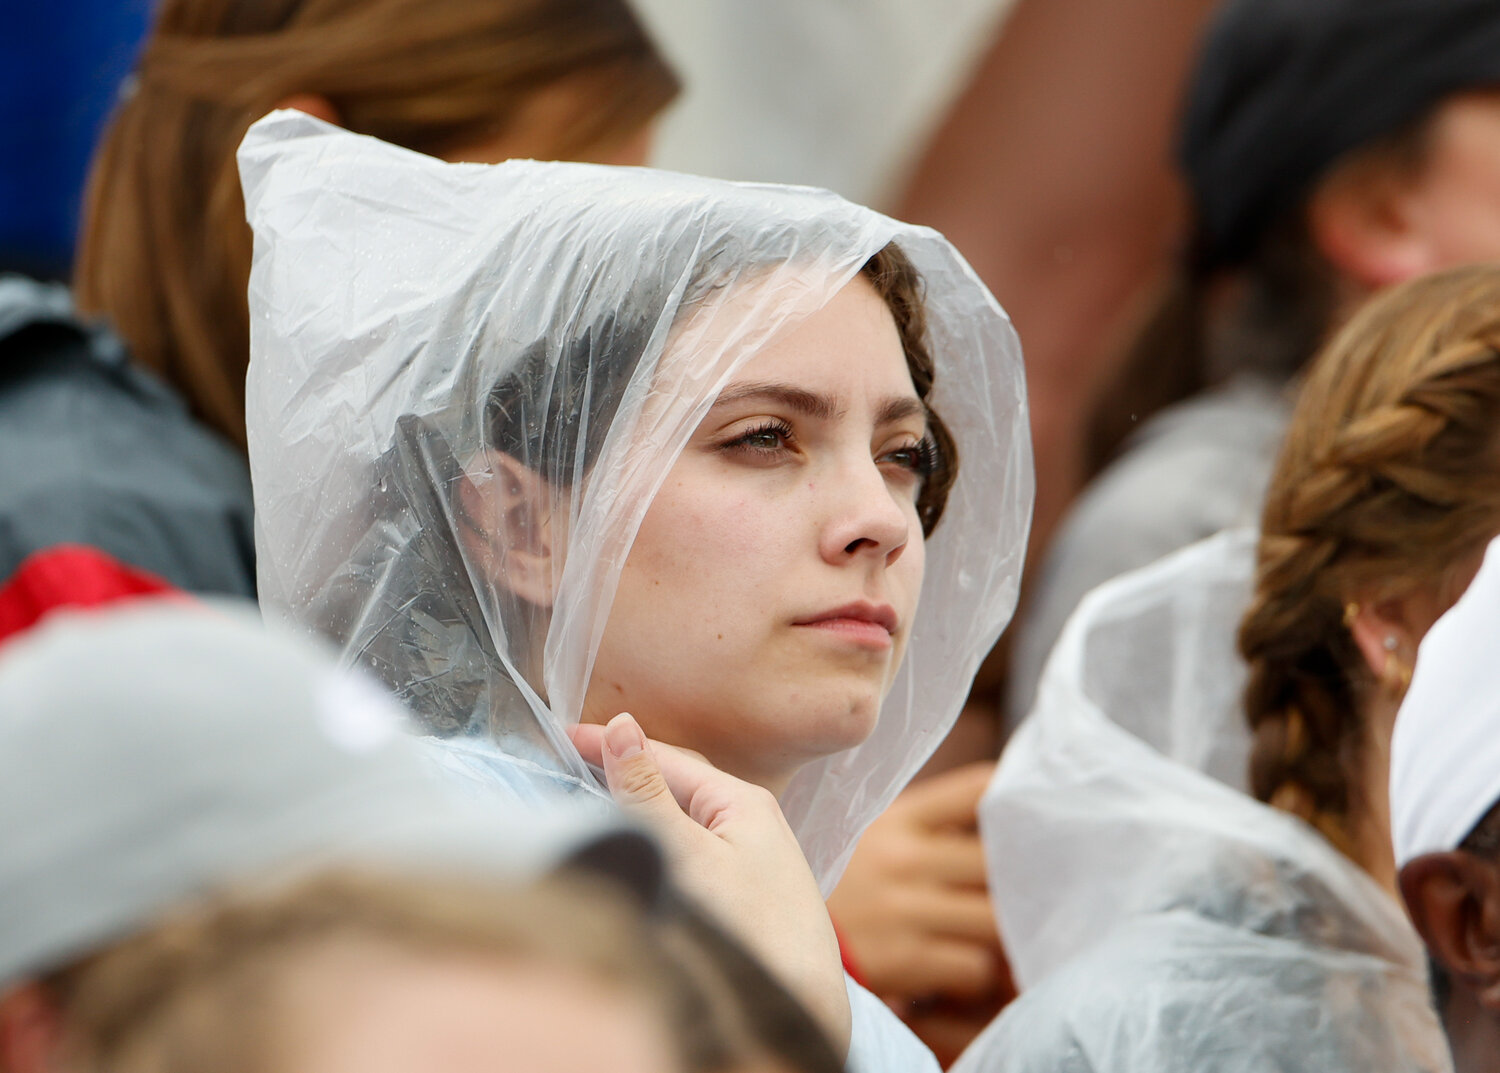 Fans watch the running events through intermittent rain showers during the UIL State Track and Field Meet on Saturday, May 13, 2023 in Austin.